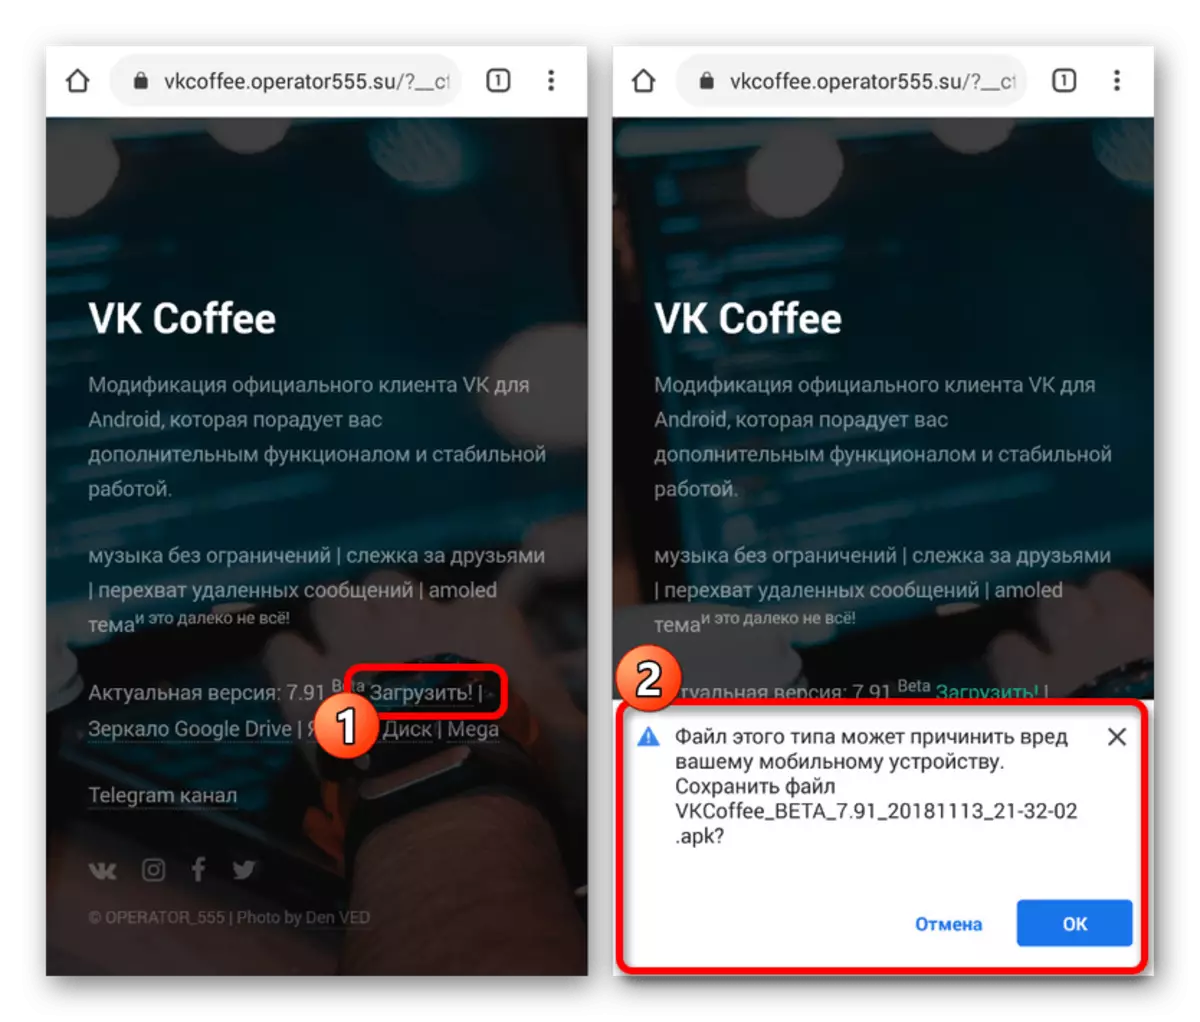 Download VK Coffee from the official website on Android